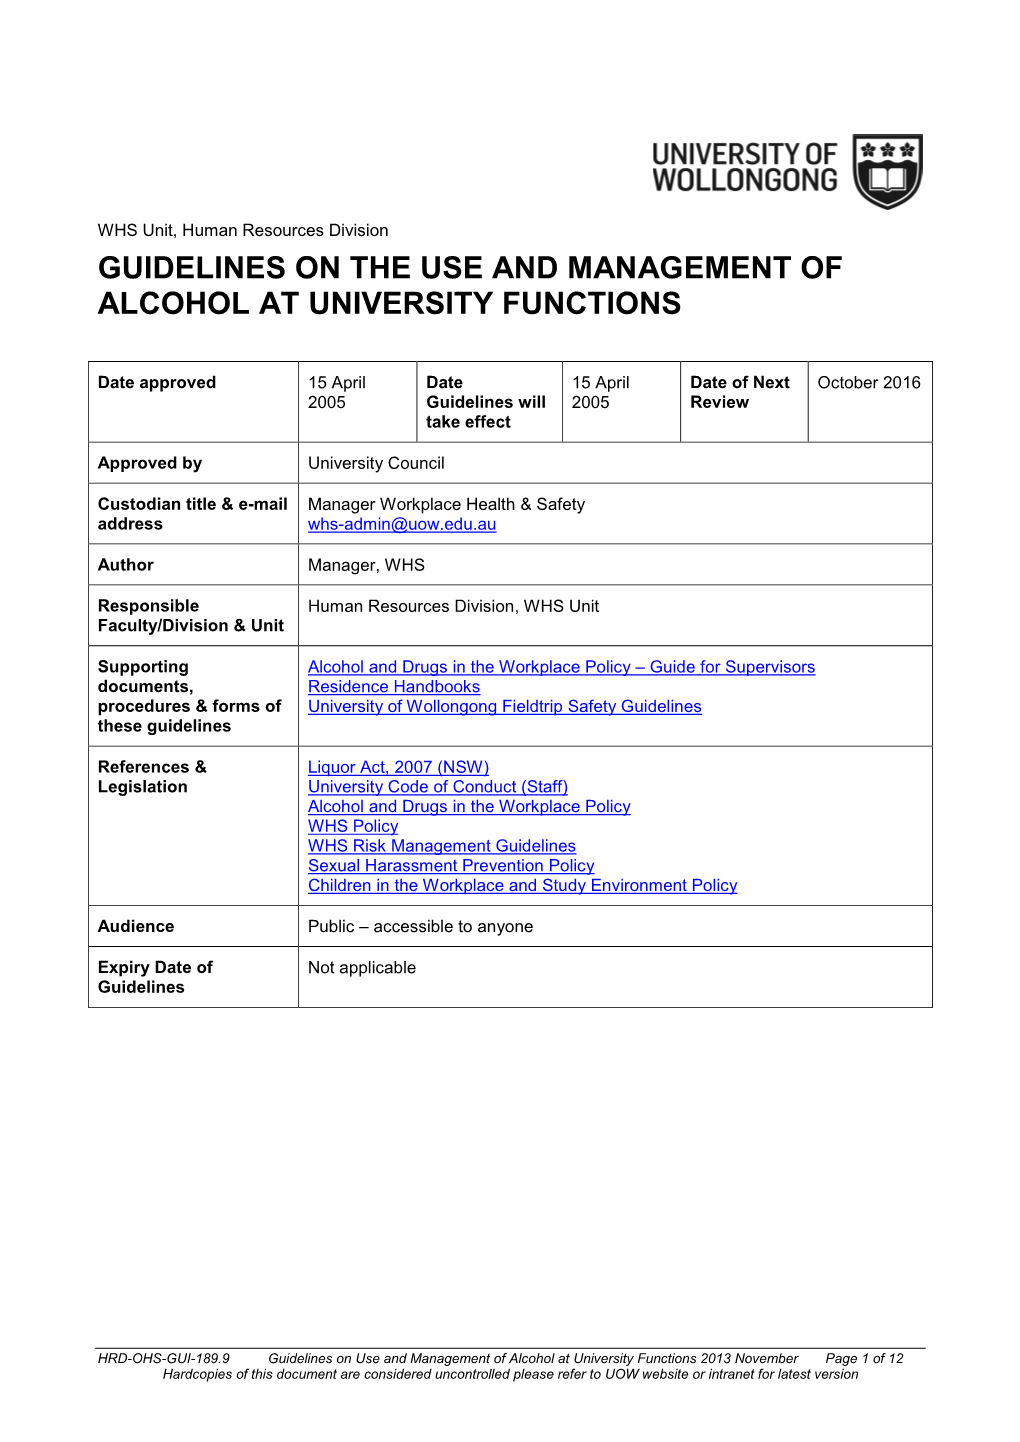 Guidelines on the Use and Management of Alcohol at University Functions